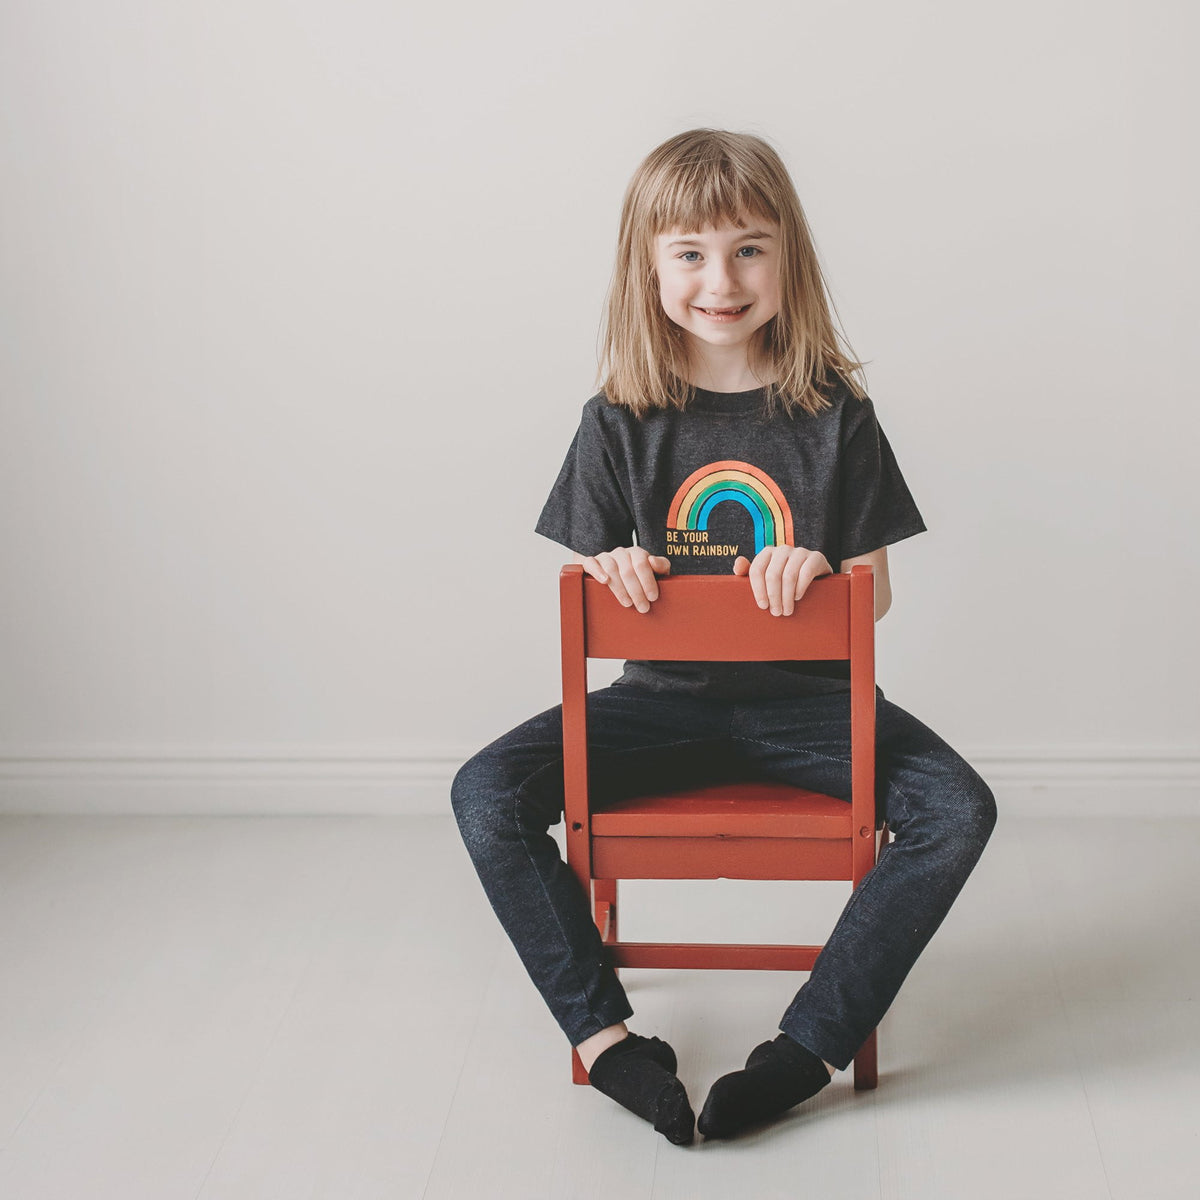 Be Your Own Rainbow Kid&#39;s T-shirt - Sweetpea and Co.